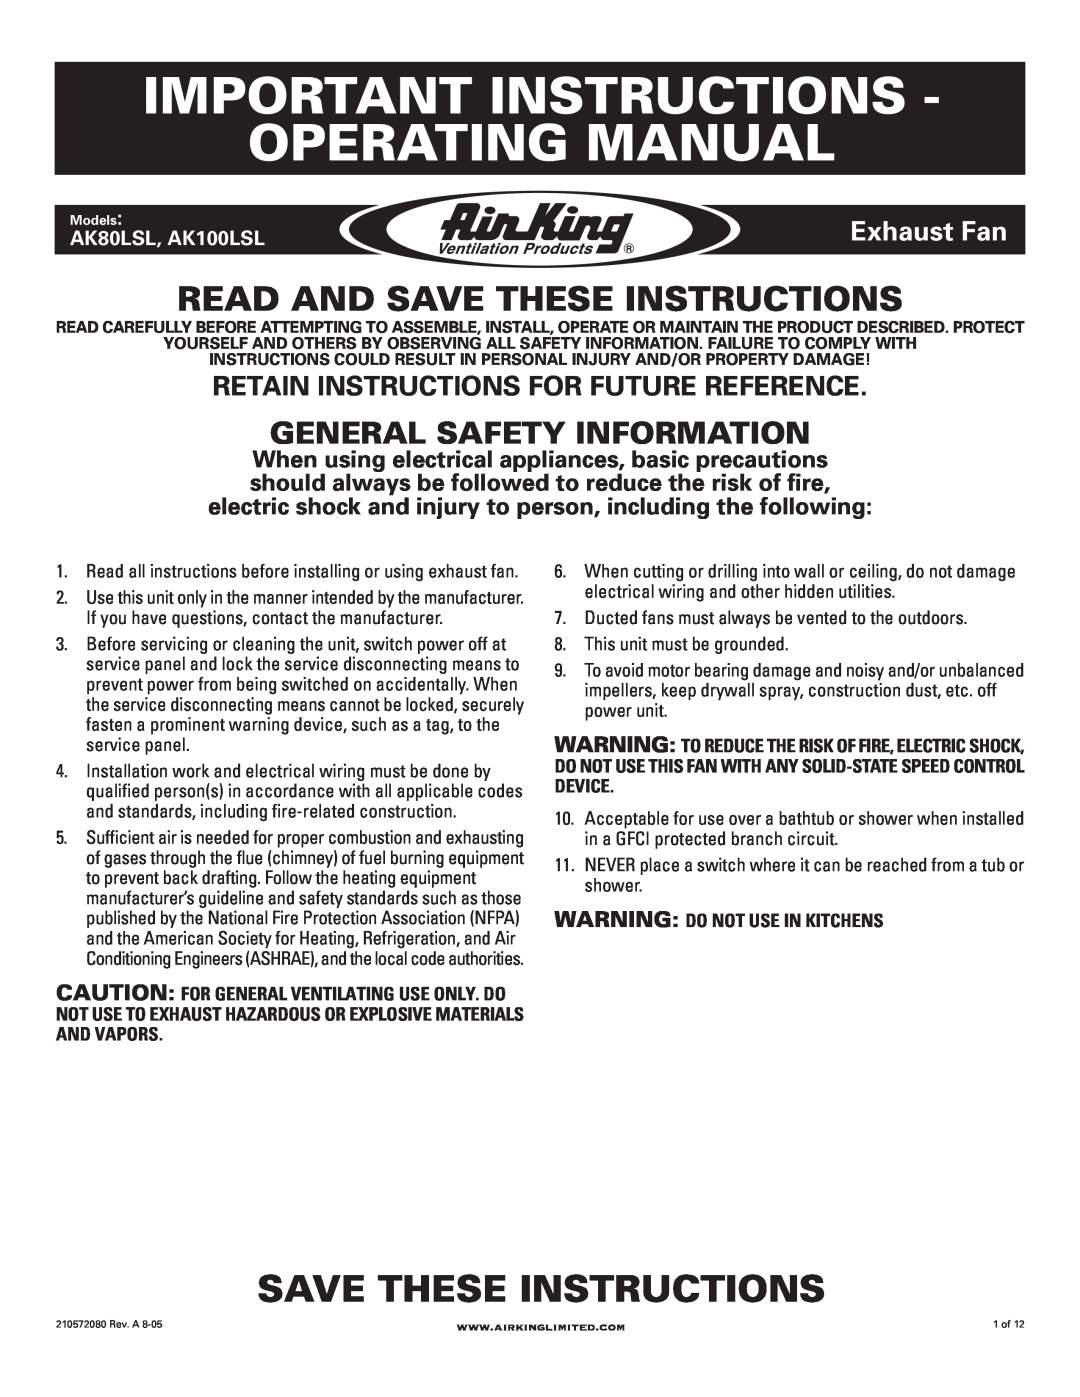 Air King AK100LSL manual Important Instructions Operating Manual, Save These Instructions, General Safety Information 